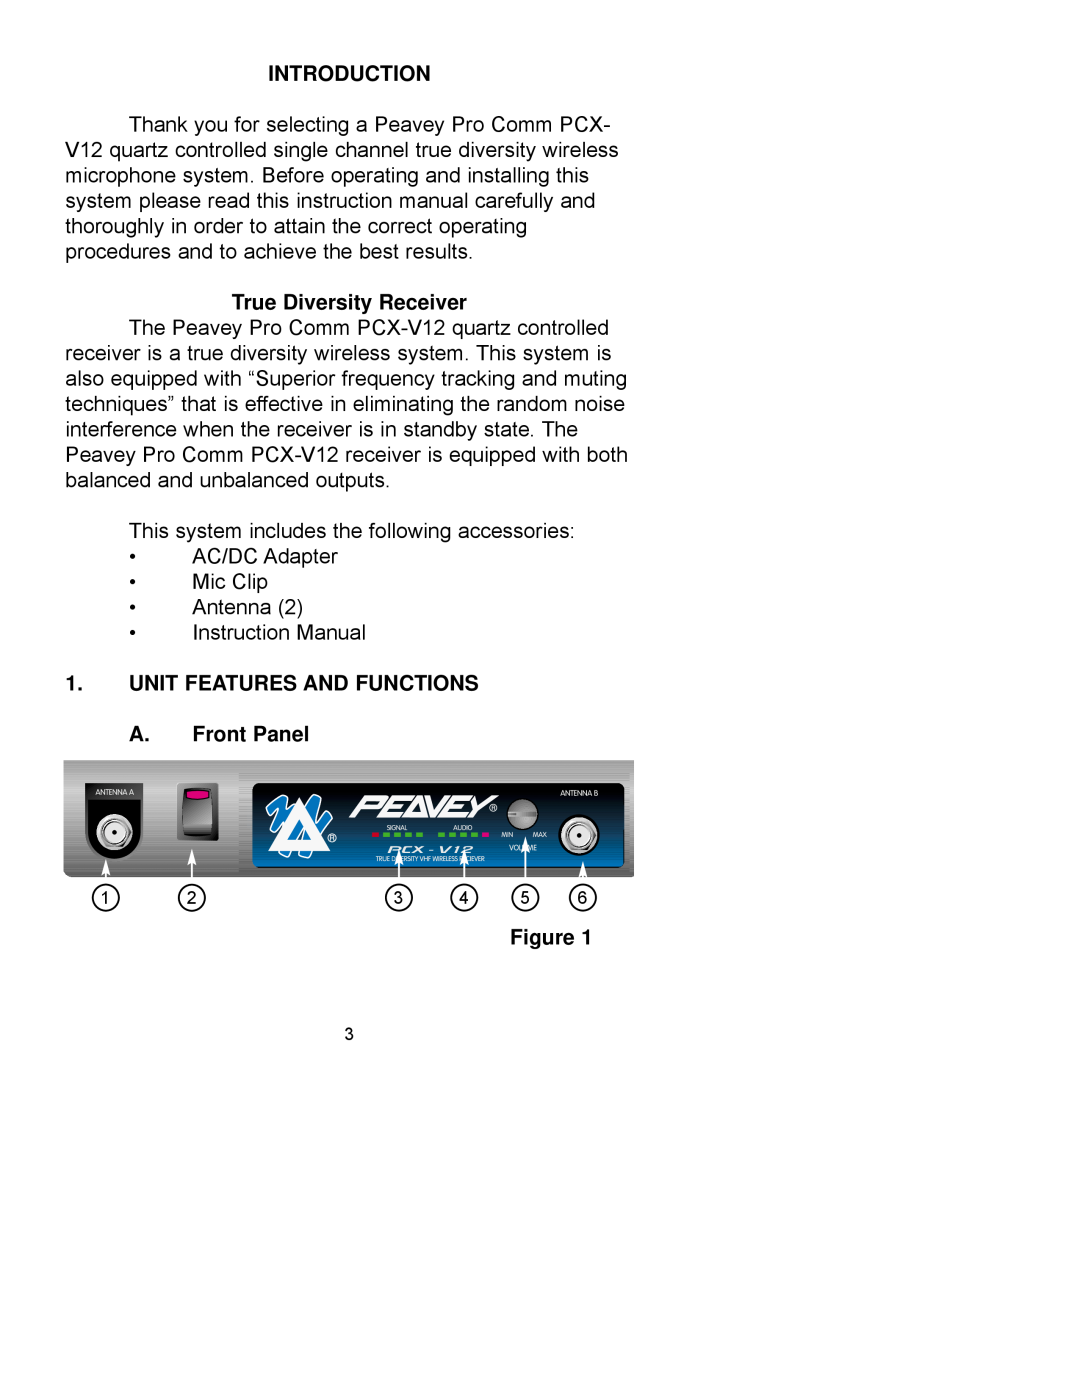 Peavey PCX-V12 manual Introduction, True Diversity Receiver, UNIT FEATURES AND FUNCTIONS A.Front Panel 